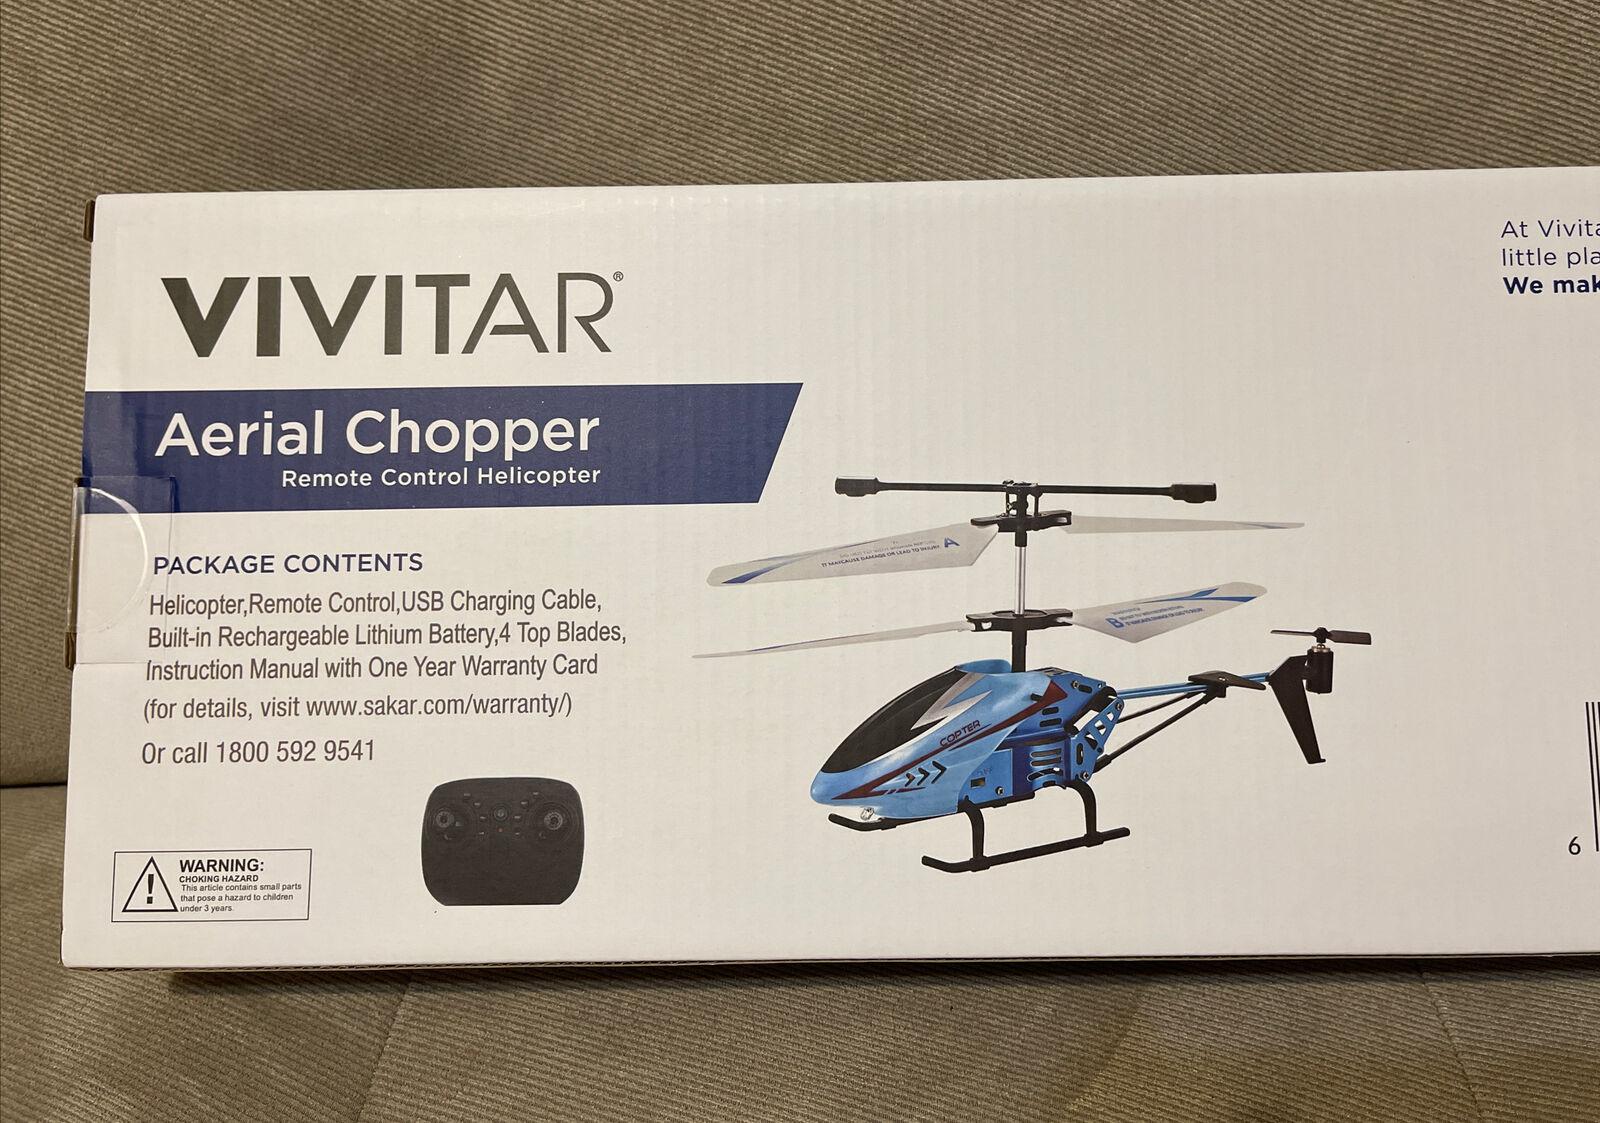 Vivitar Air Rover Jumbo Rc Helicopter: Accessories for the Vivitar Air Rover: Where to Buy and What to Expect